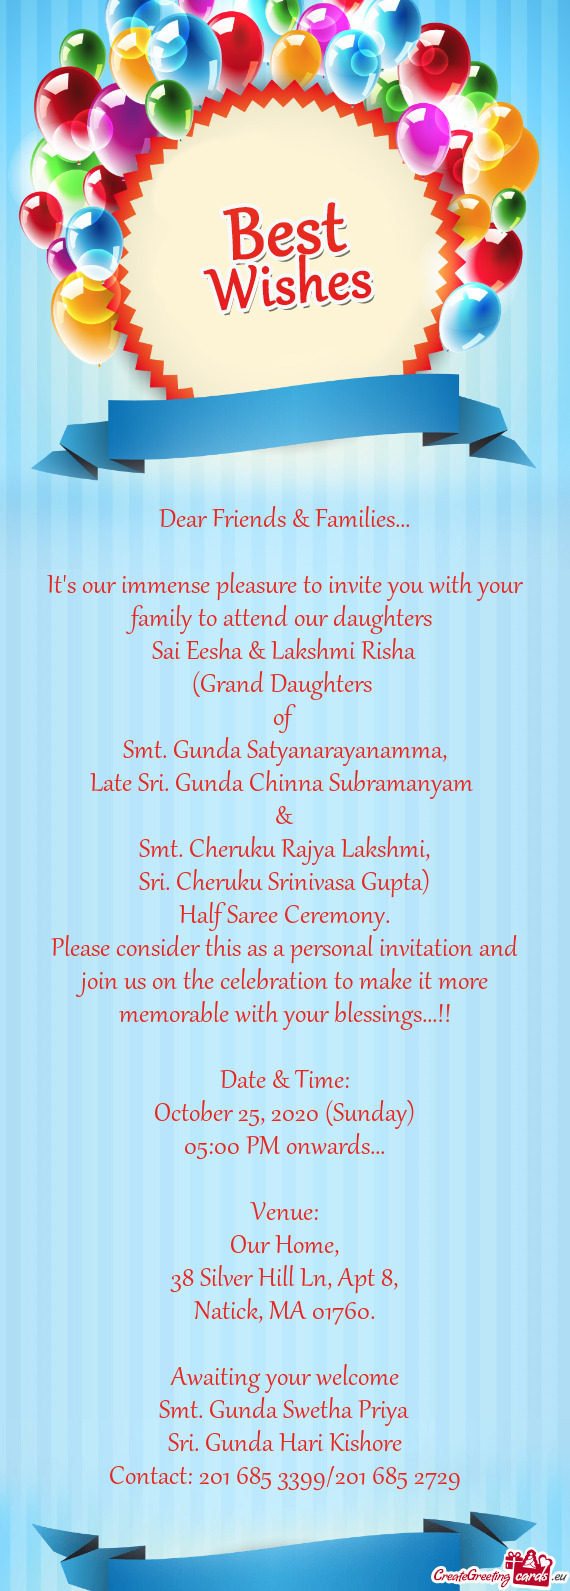 Please consider this as a personal invitation and join us on the celebration to make it more memorab